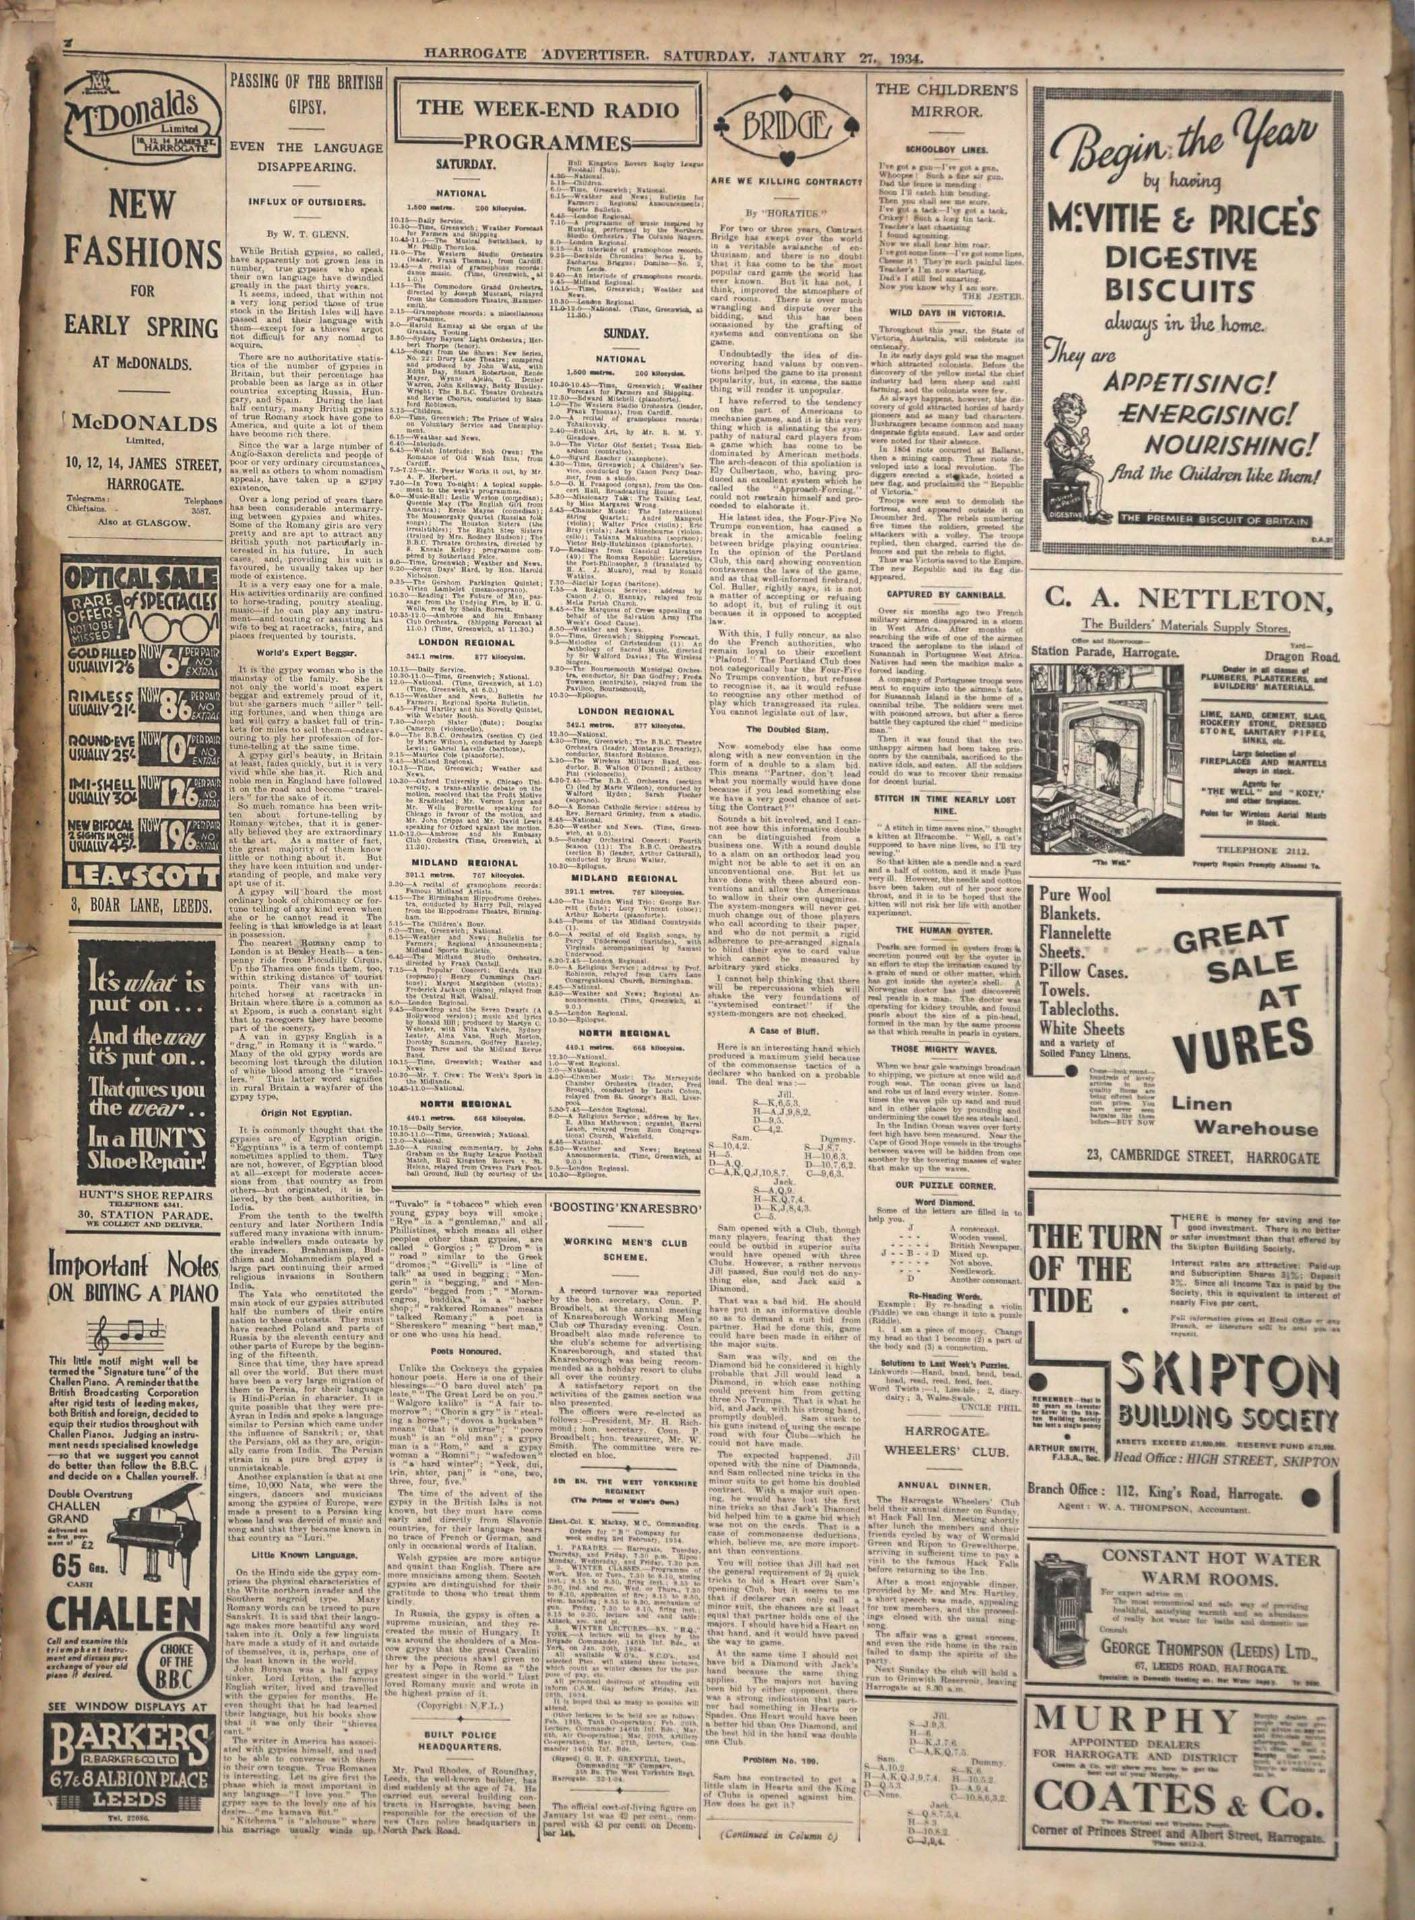 The Harrogate Advertiser 98th Year of Publication - Sat Jan 6th 1934 - price 2D by post for 12 - Image 2 of 2